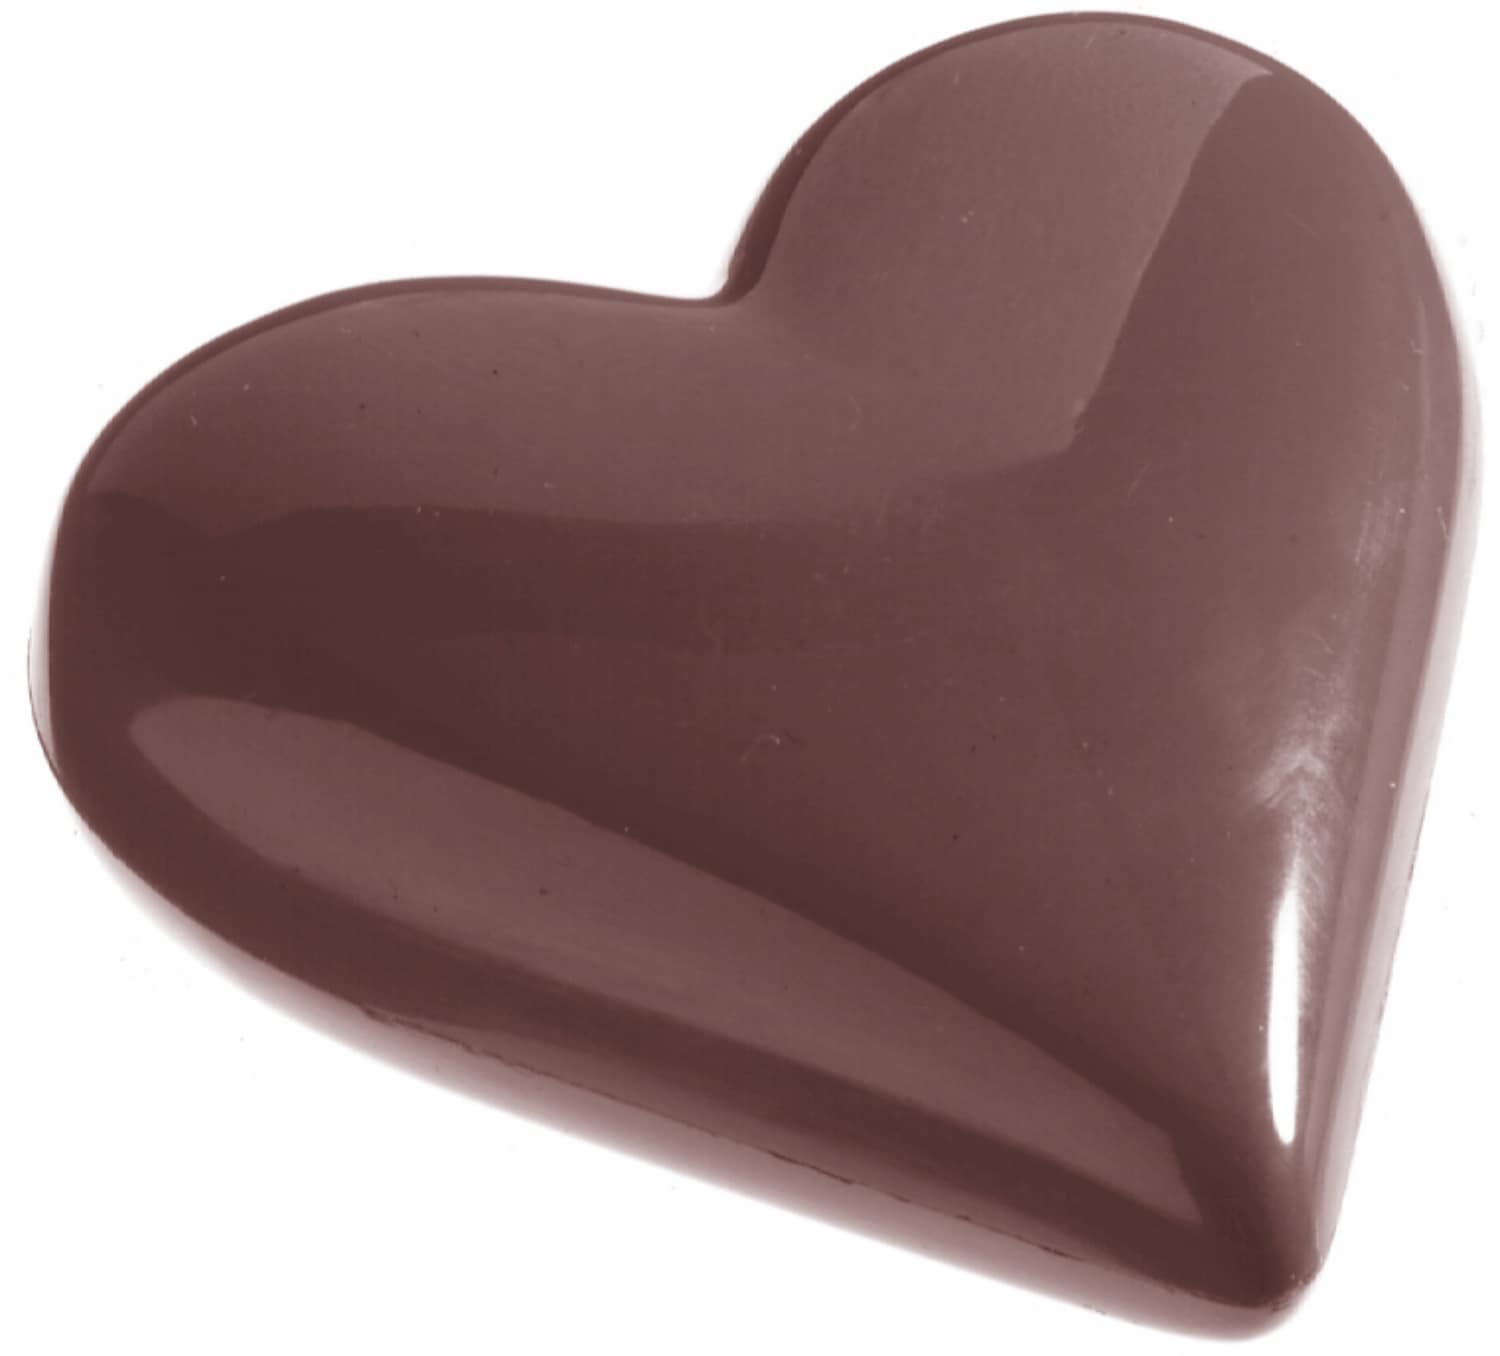 Chocolate mould "heart" 421146 421146